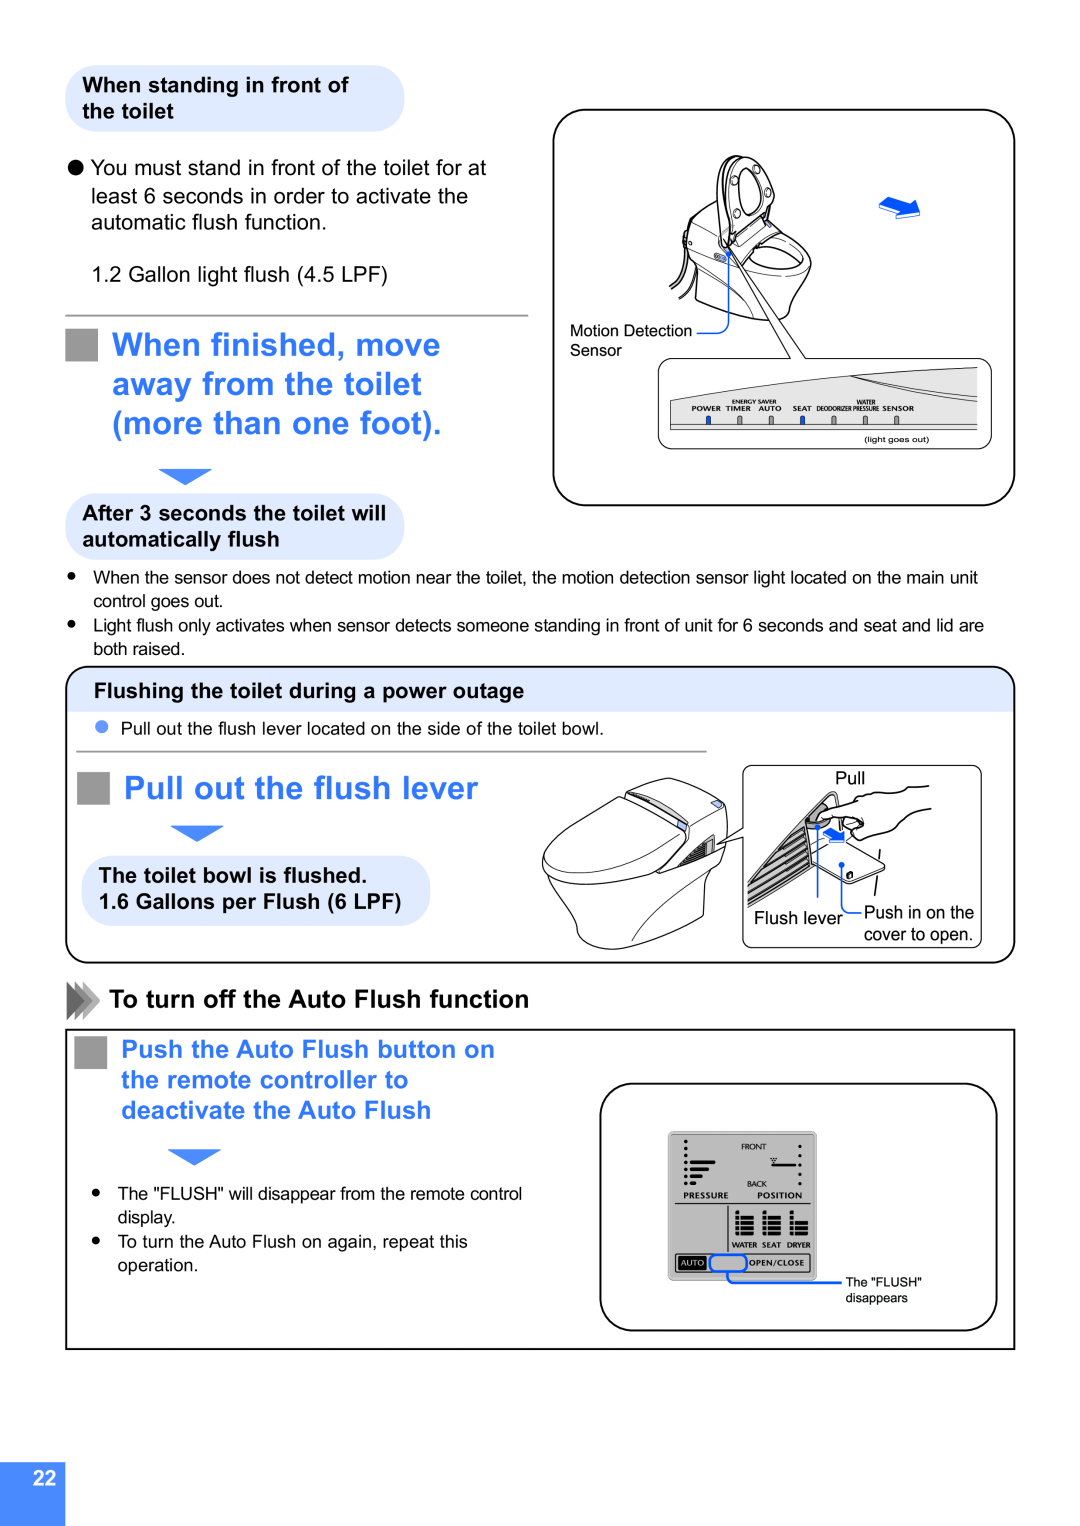 Toto MS990CG lightgoesout, Sensor, Pull out the flush lever, To turn off the Auto Flush function, Flushlever, Pushinonthe 